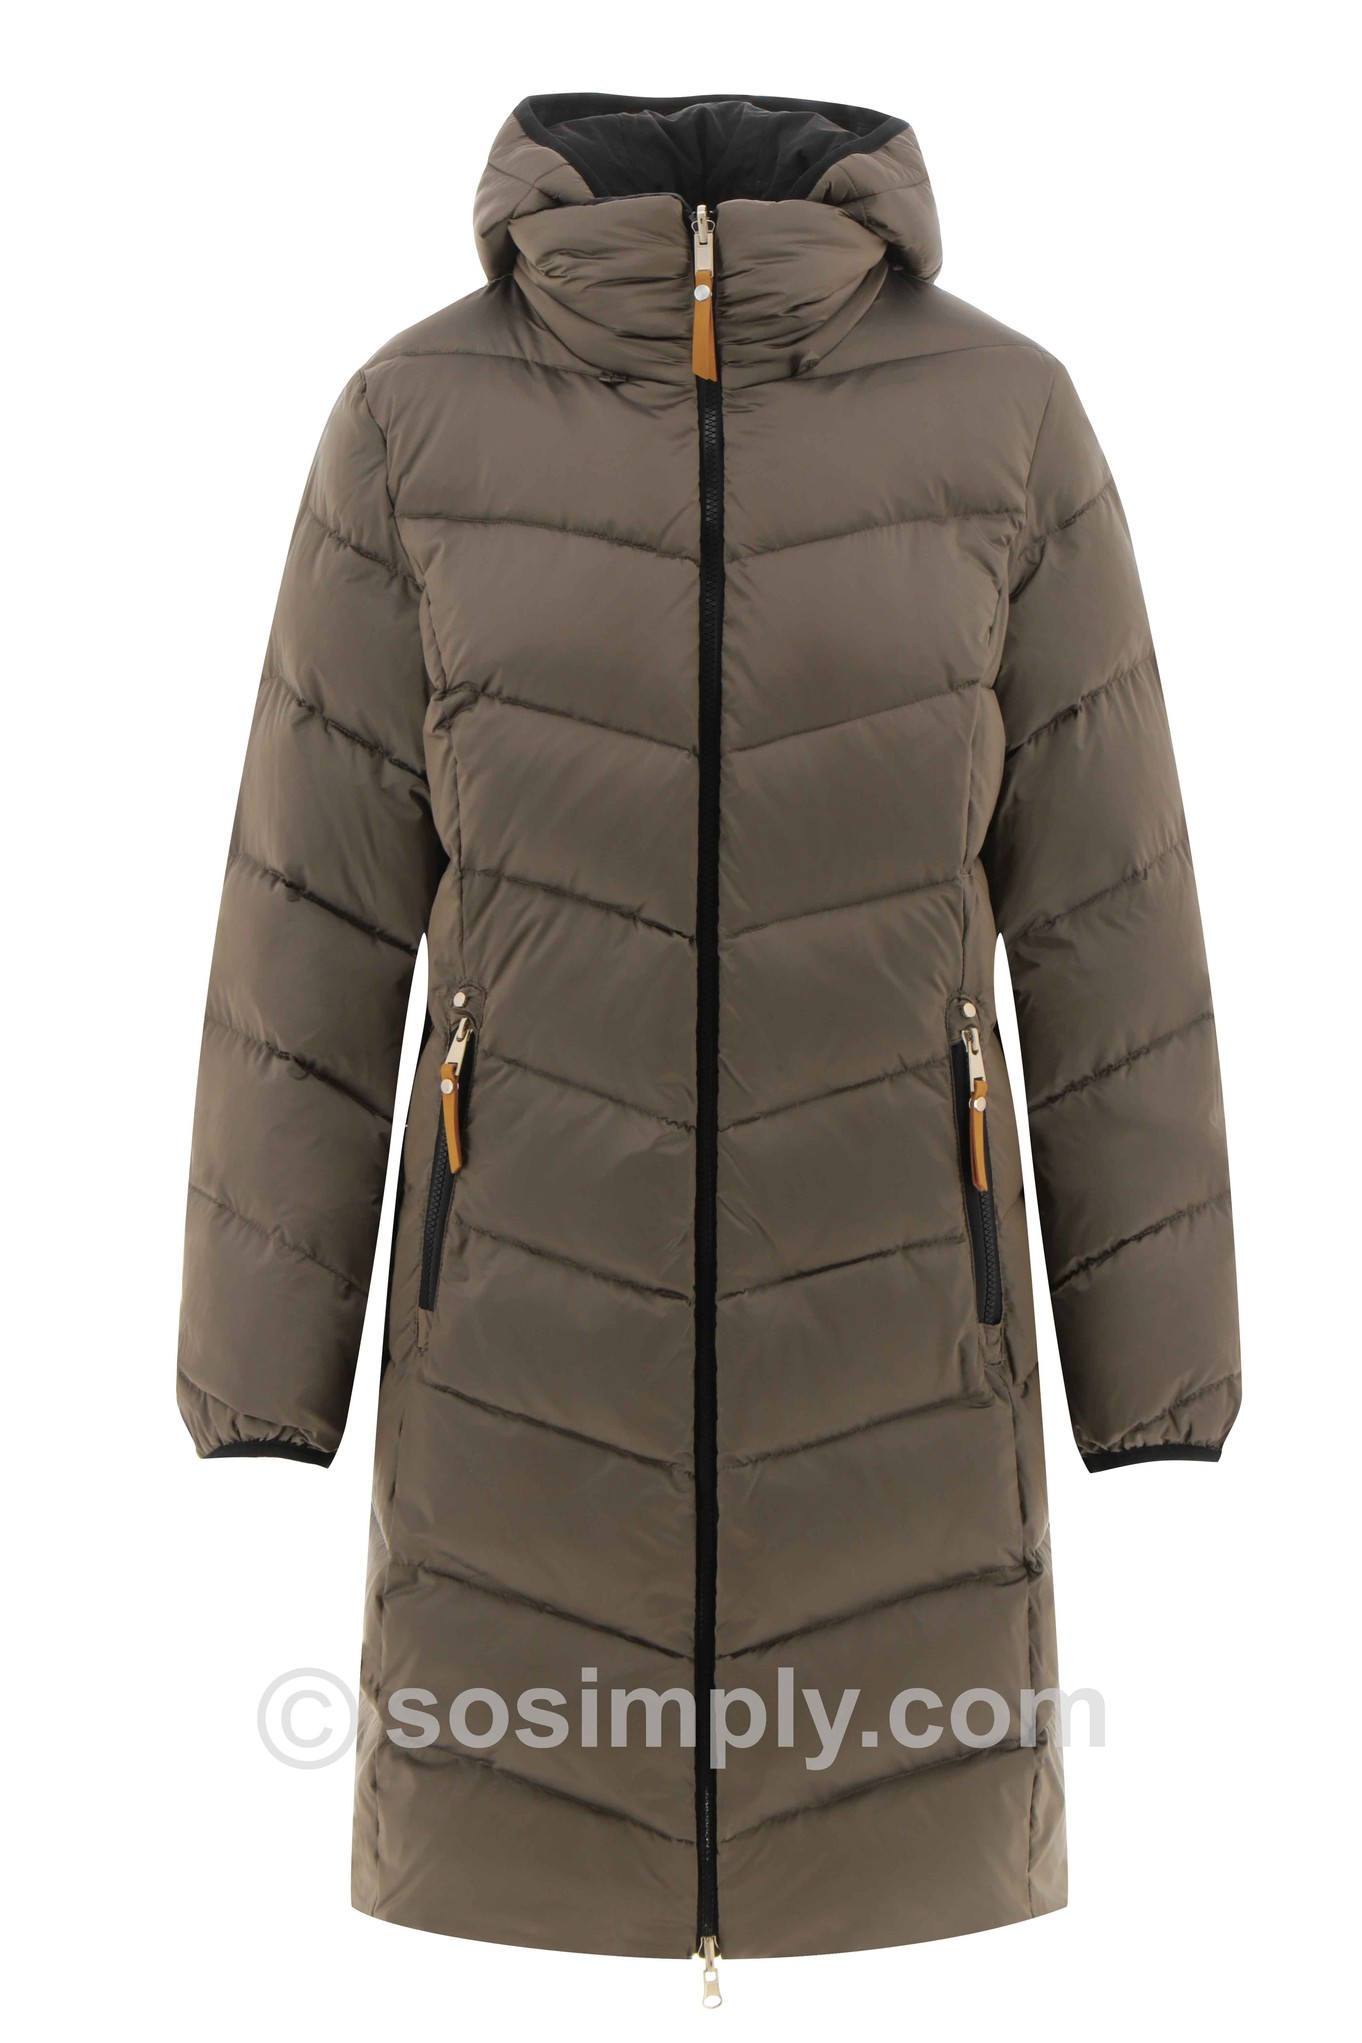 Frandsen Carina Reversible Quilted Down Jacket